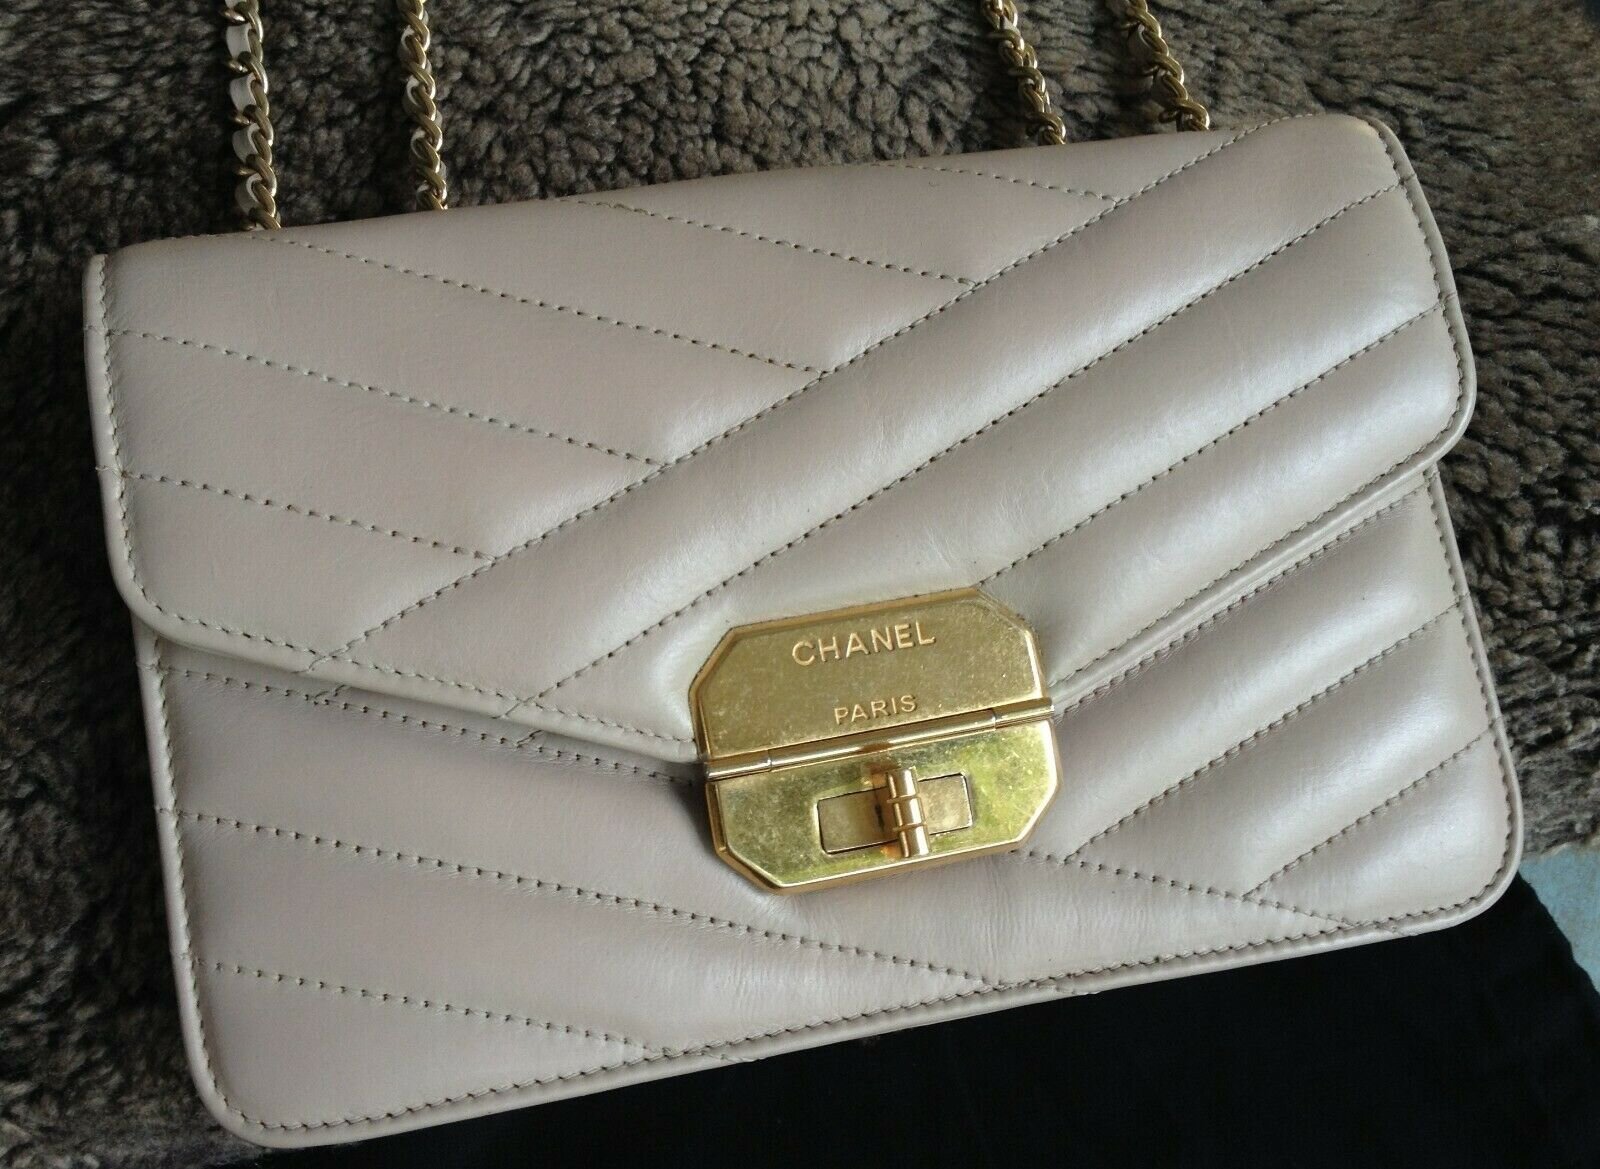 CHANEL Beige Chevron Quilted Herringbone Leather Gold Medal Chain Small ...